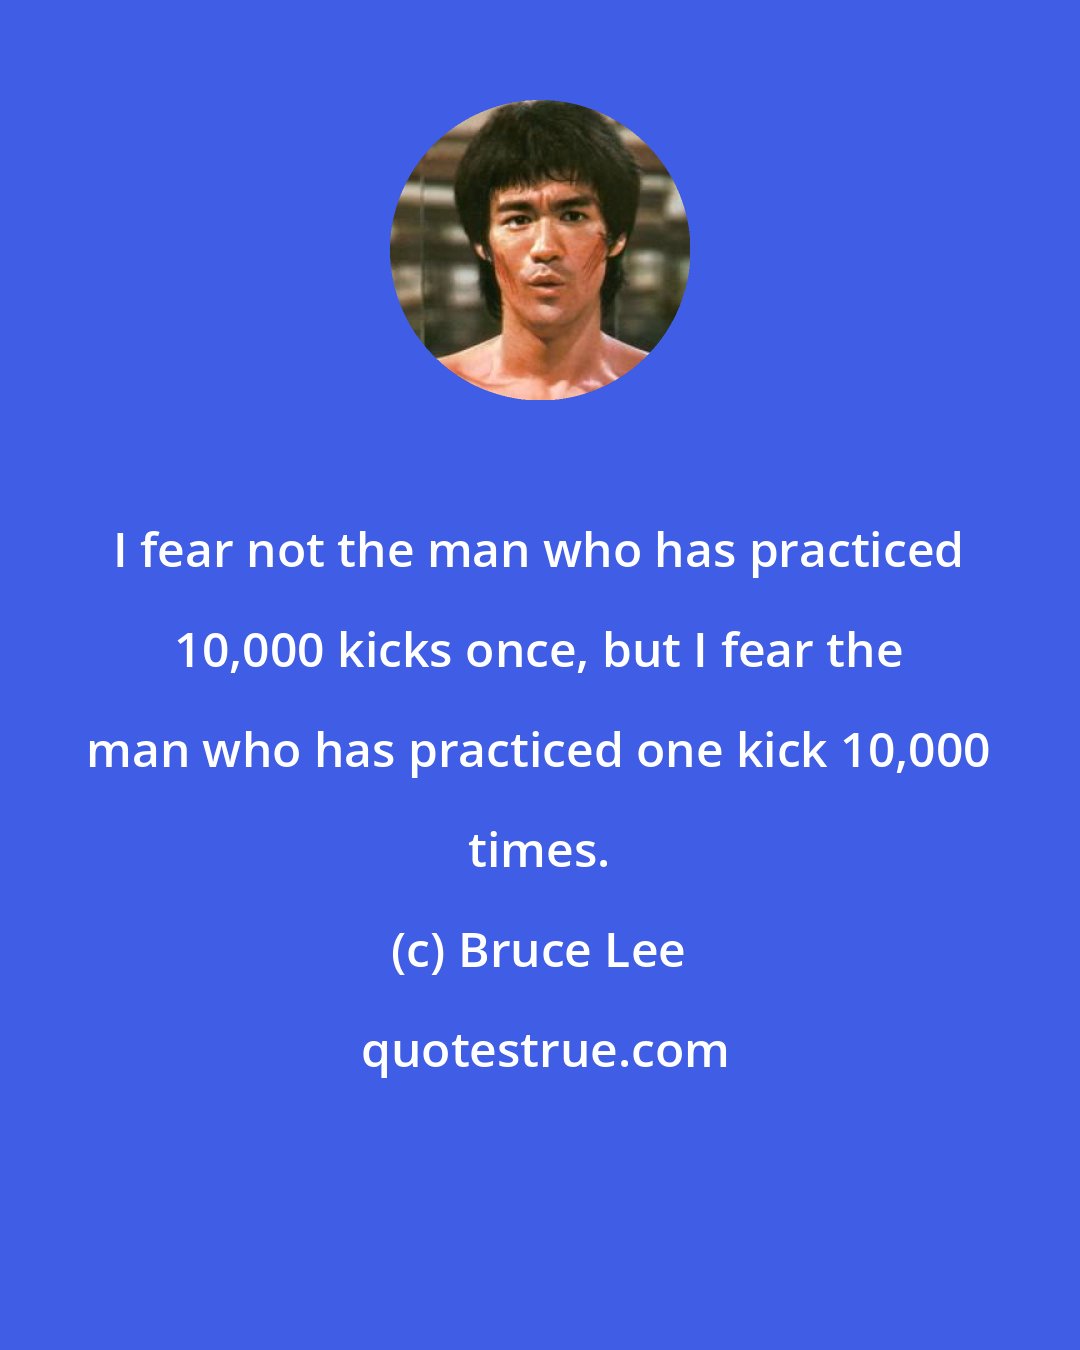 Bruce Lee: I fear not the man who has practiced 10,000 kicks once, but I fear the man who has practiced one kick 10,000 times.